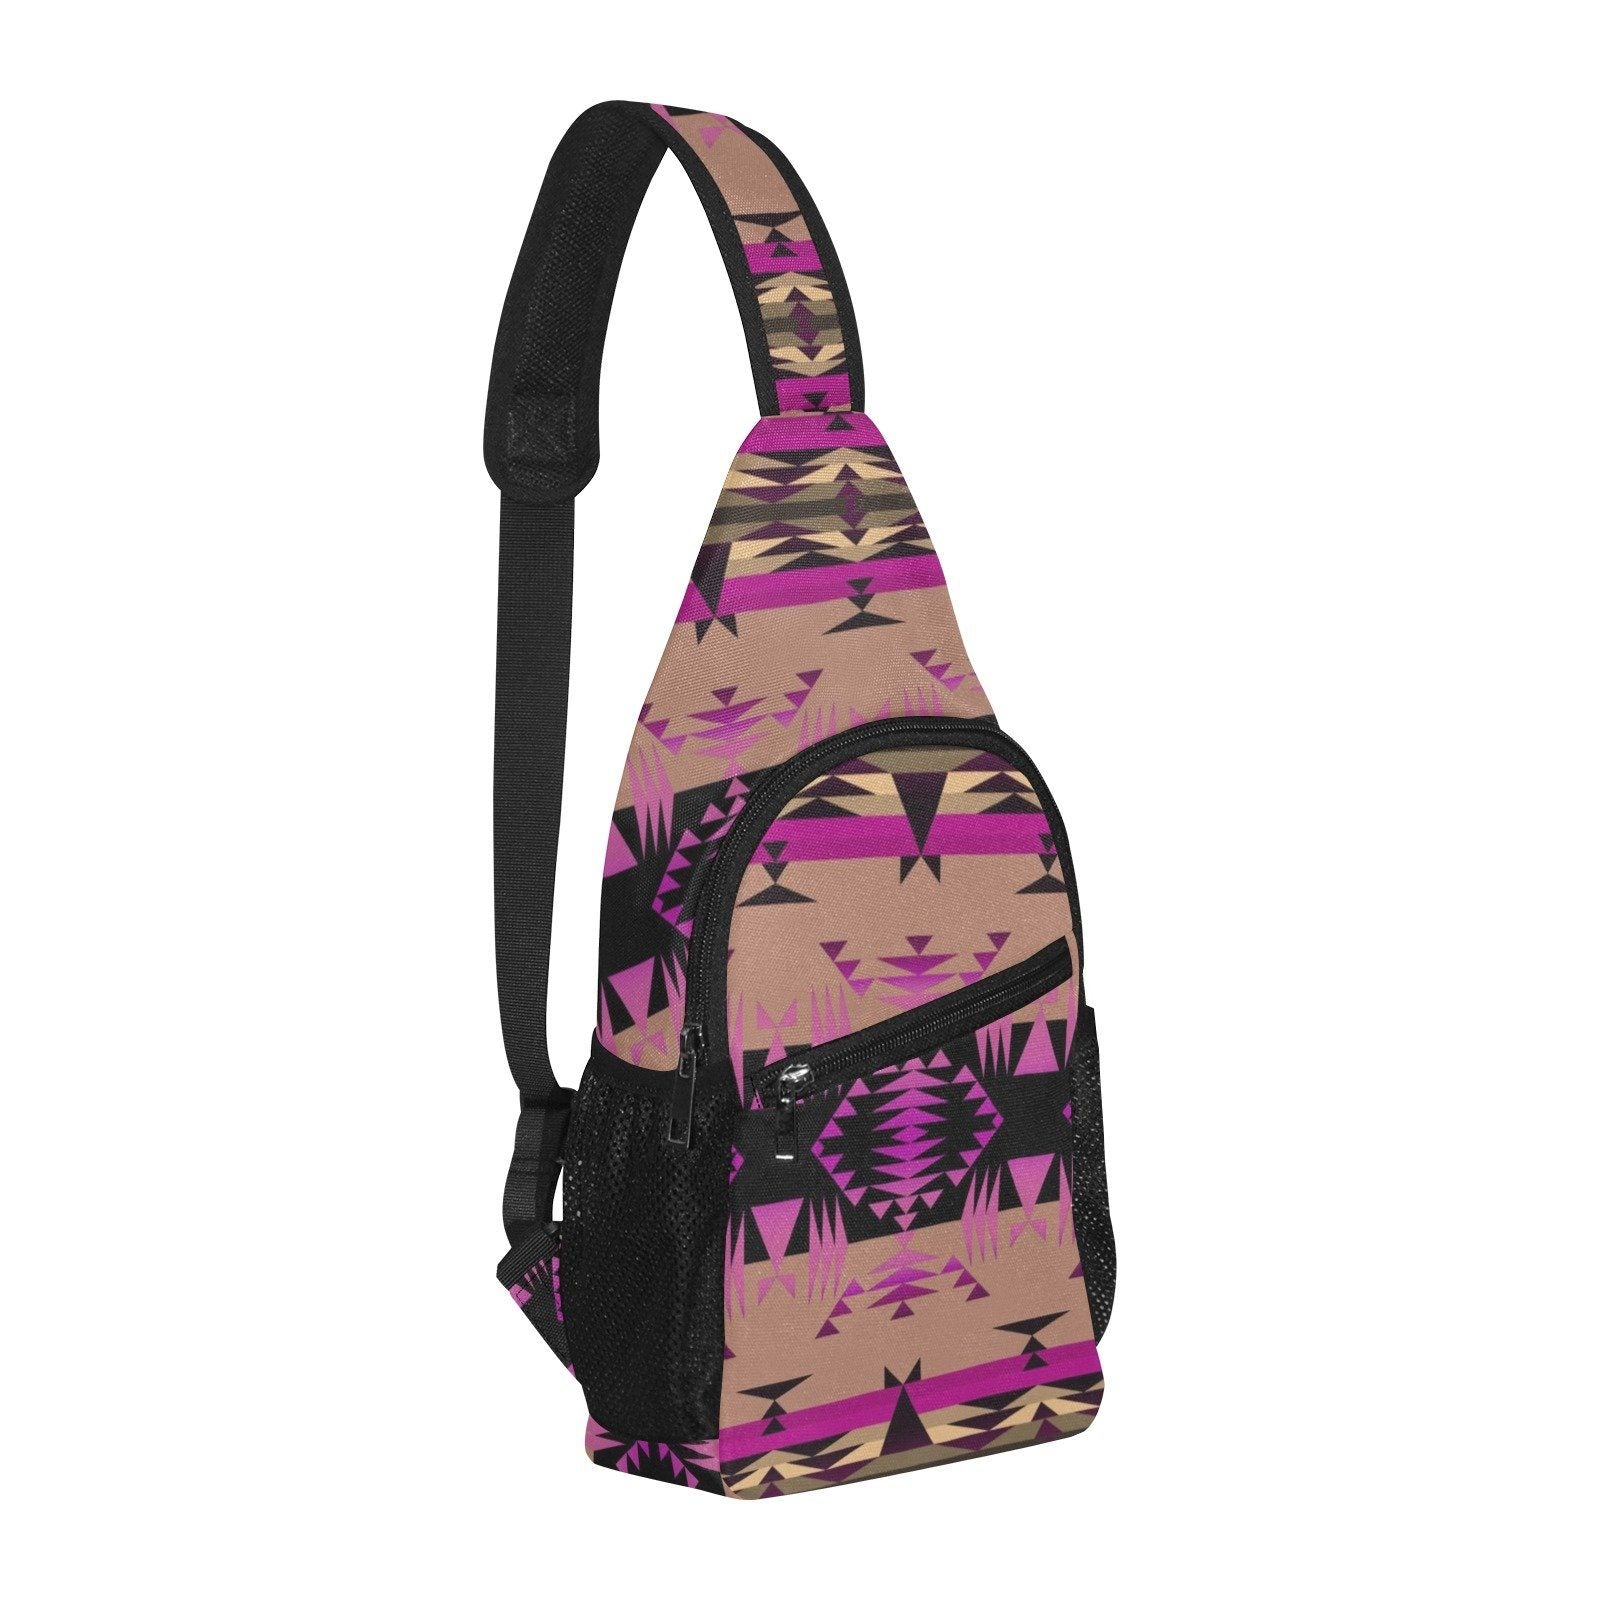 Between the Mountains Berry All Over Print Chest Bag (Model 1719) All Over Print Chest Bag (1719) e-joyer 